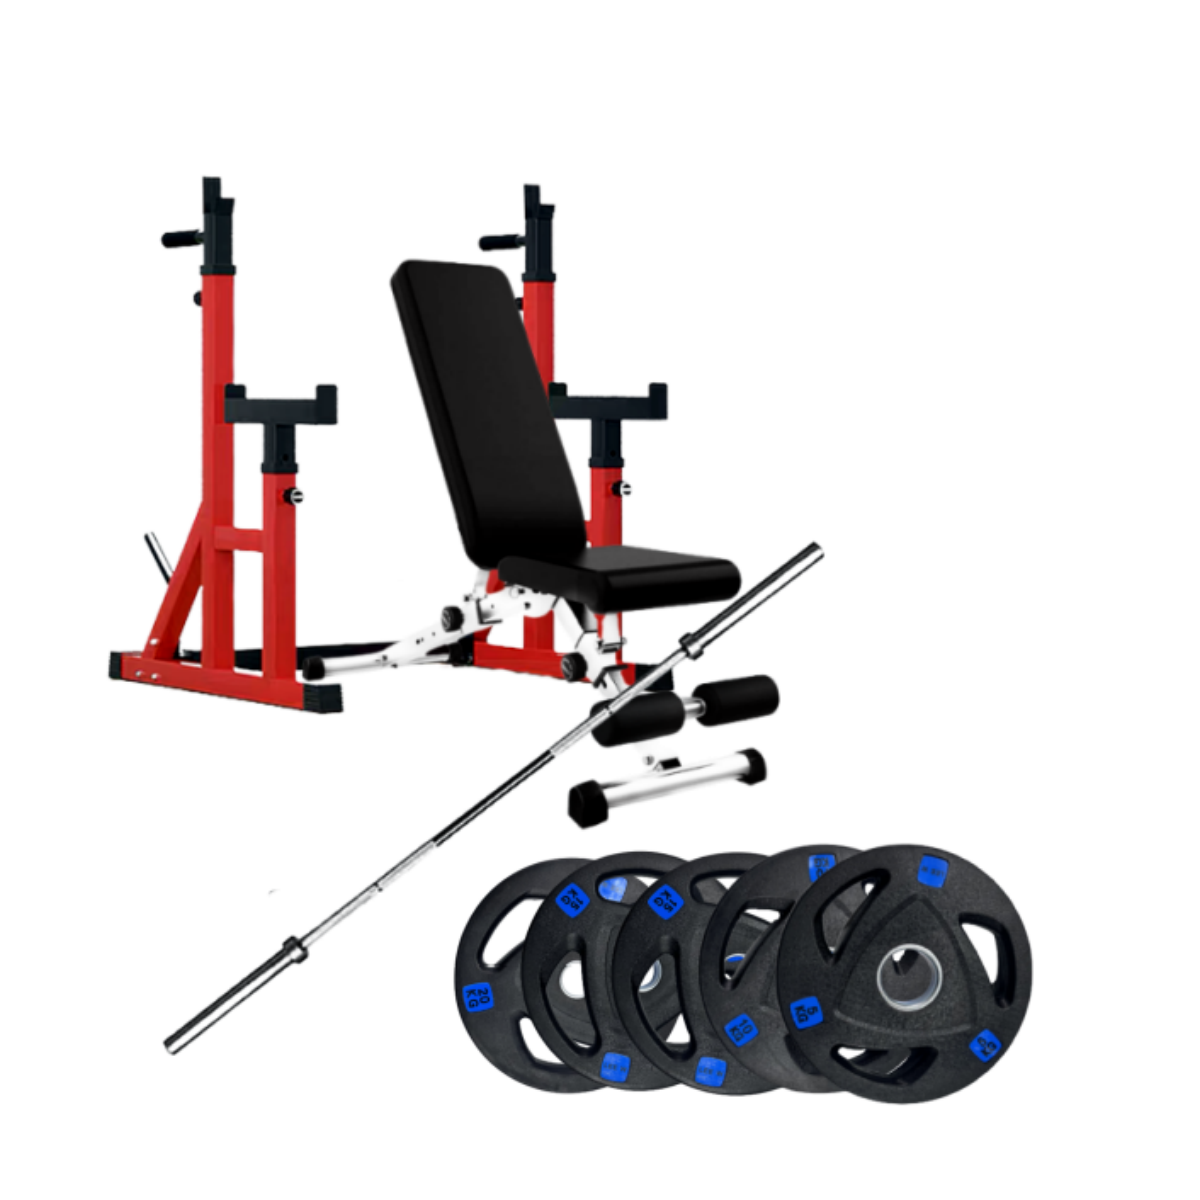 Home Gym Set|Squat Rack with Bench and Weights Set